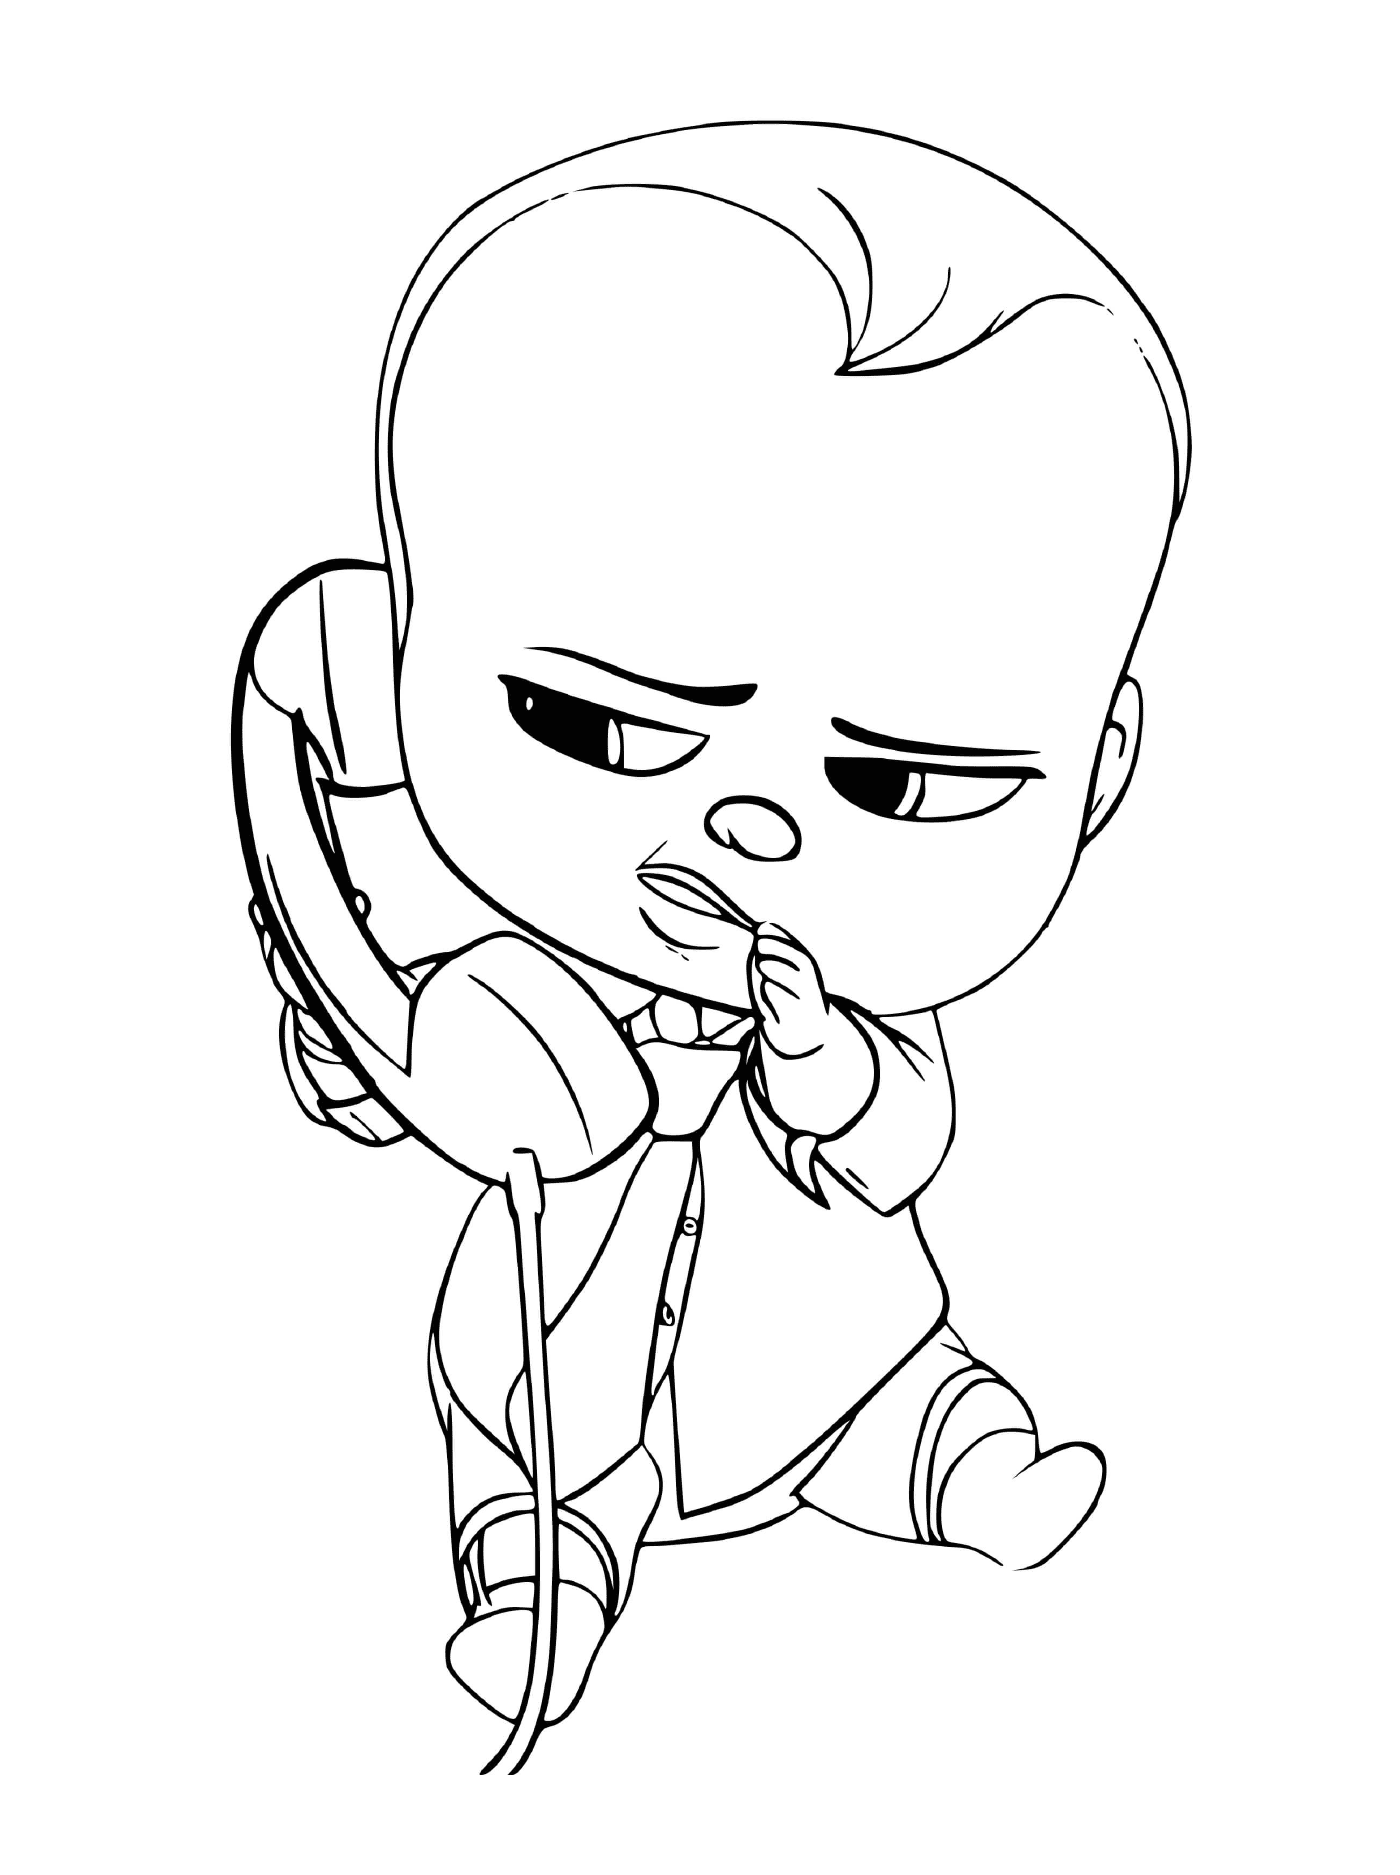  A baby crying with a phone 